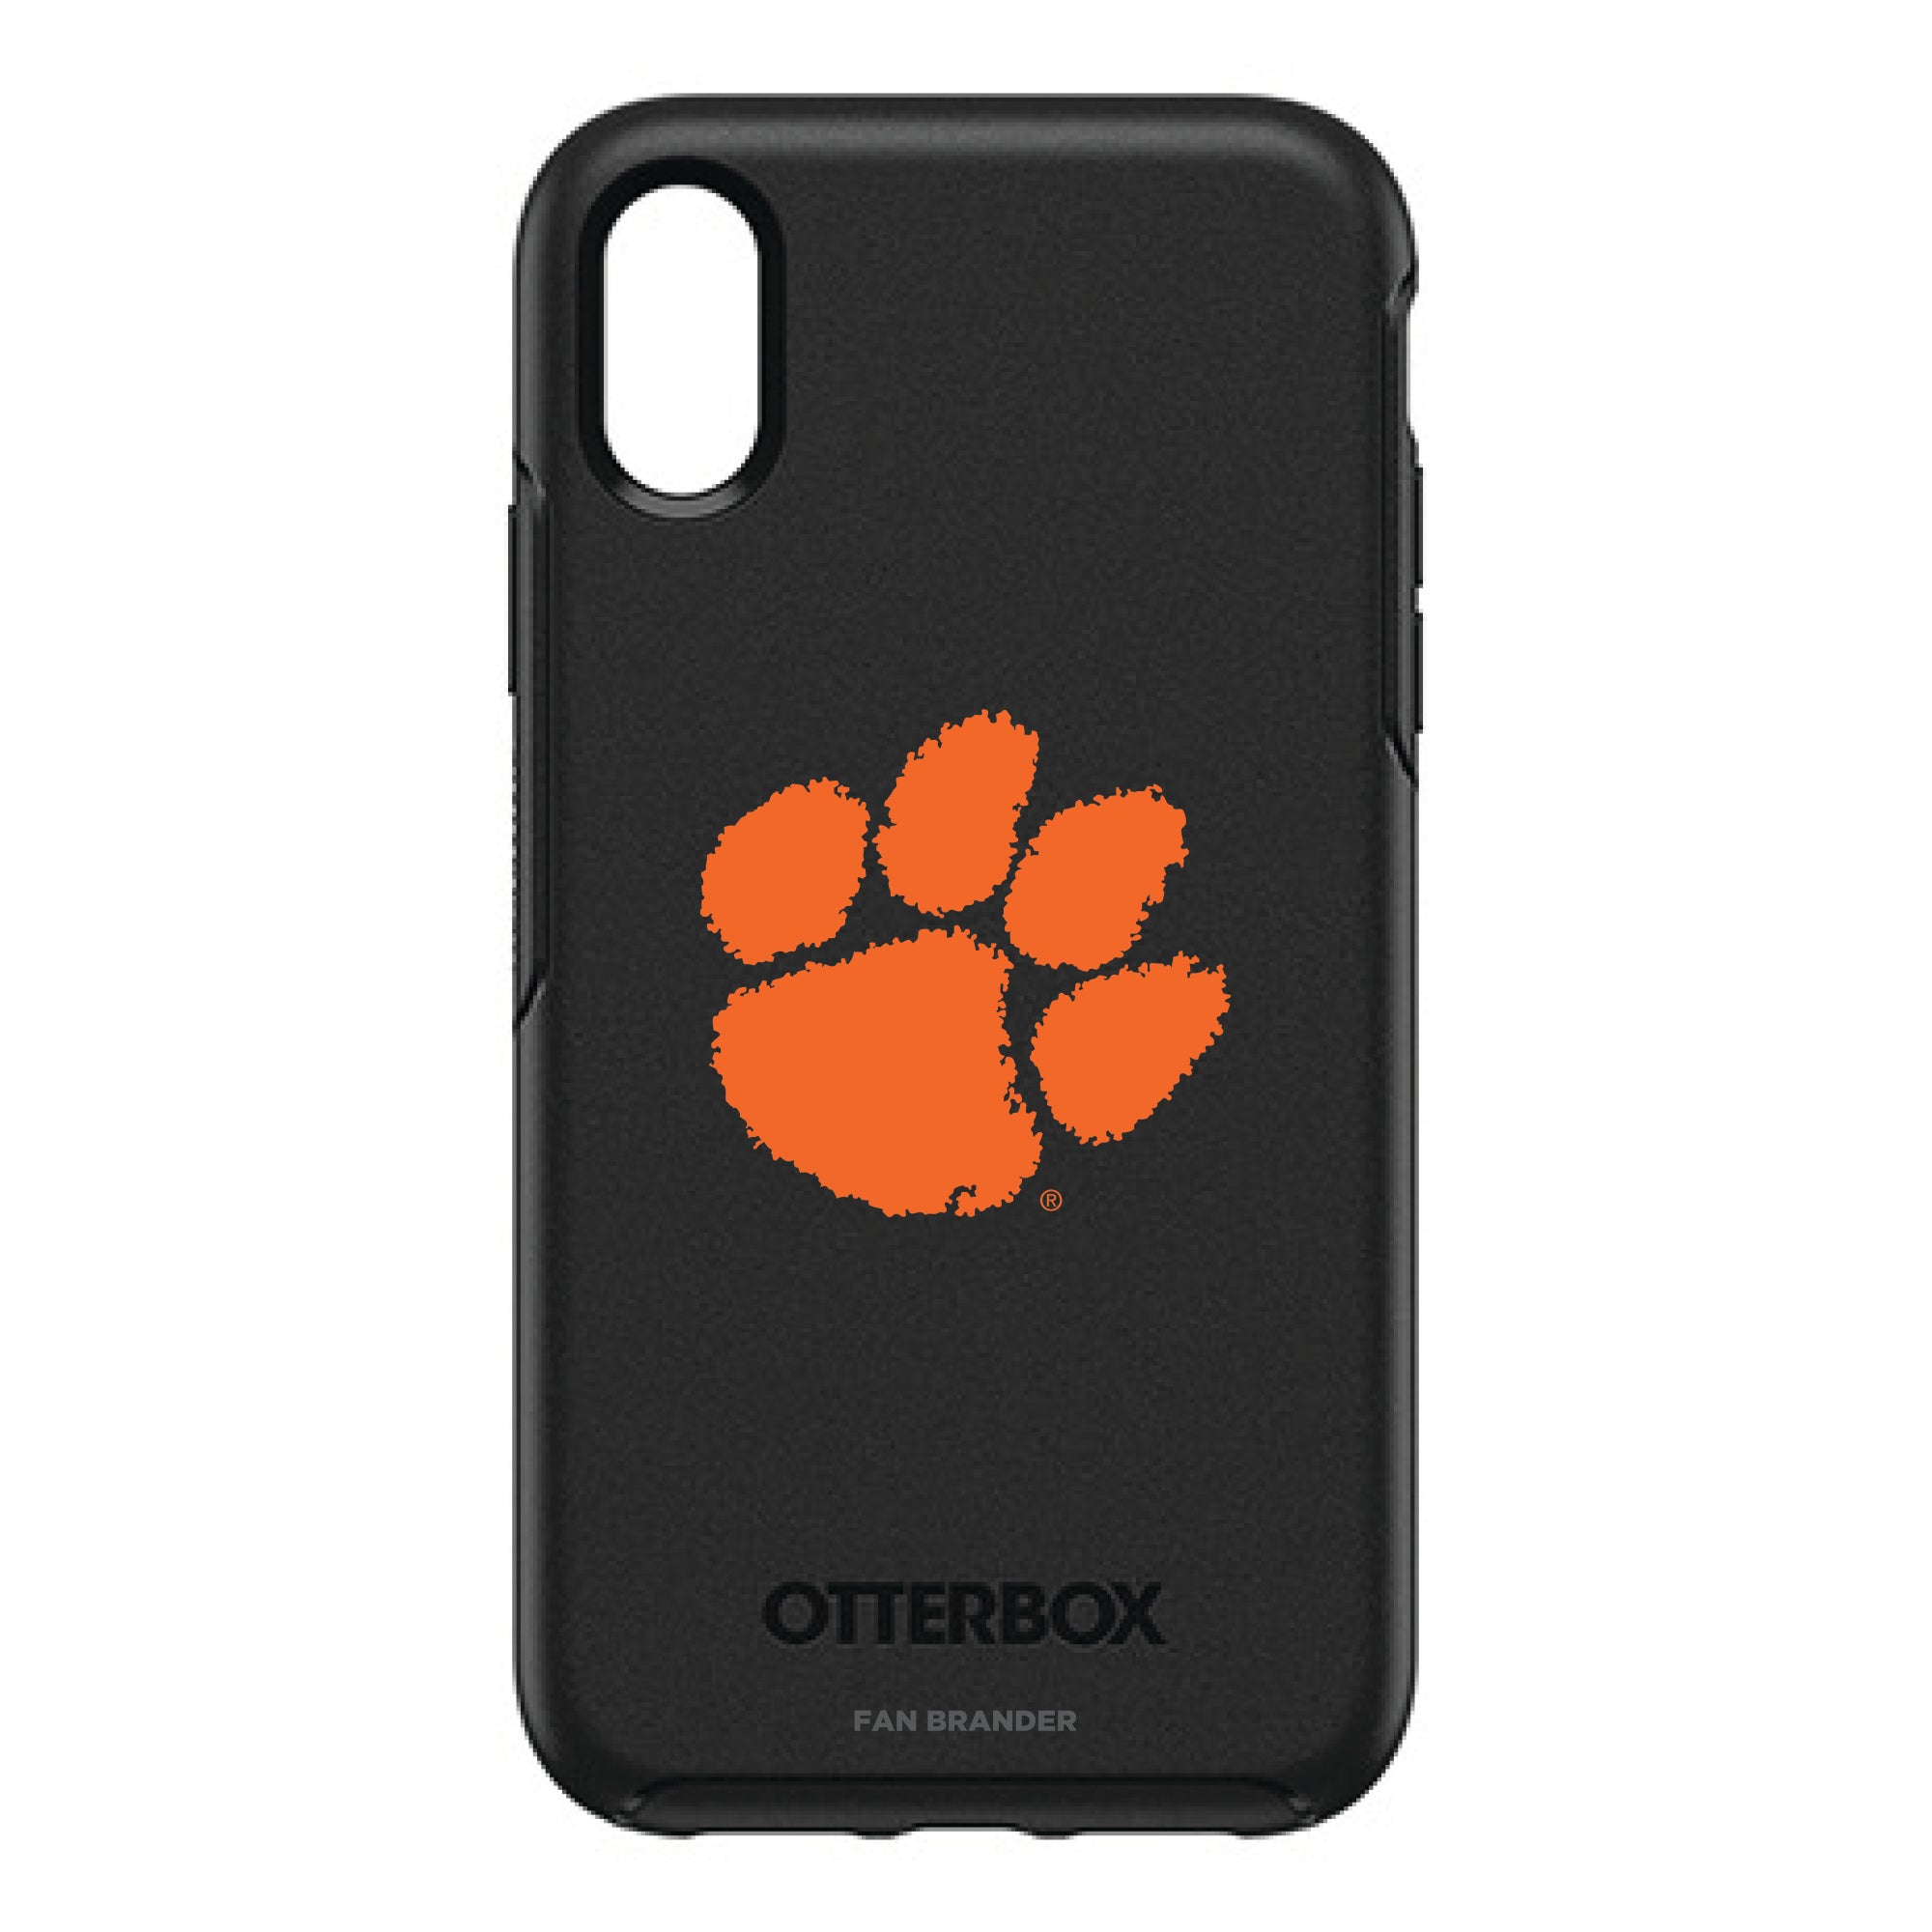  NCAA OtterBox Symmetry Phone case Compatible with Apple iPhone  with Urban Camo Design (Louisville Cardinals iPhone 13) : Sports & Outdoors